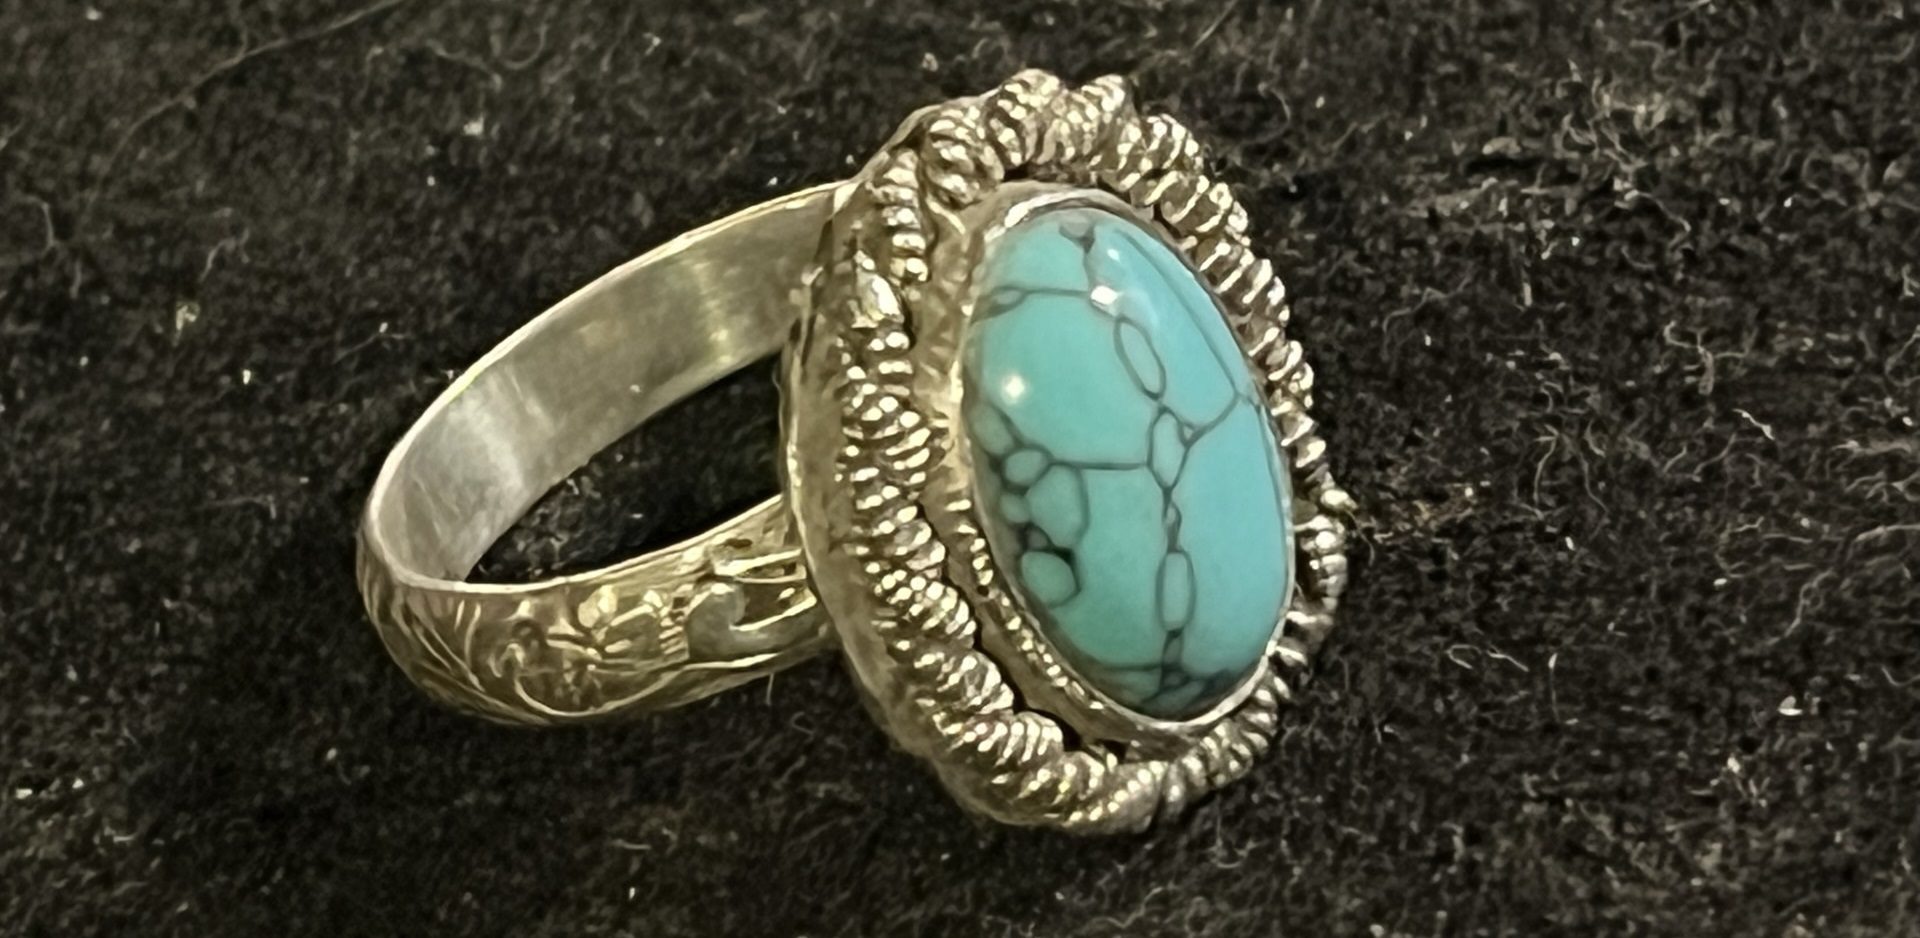 A silver ring with a turquoise stone on it.